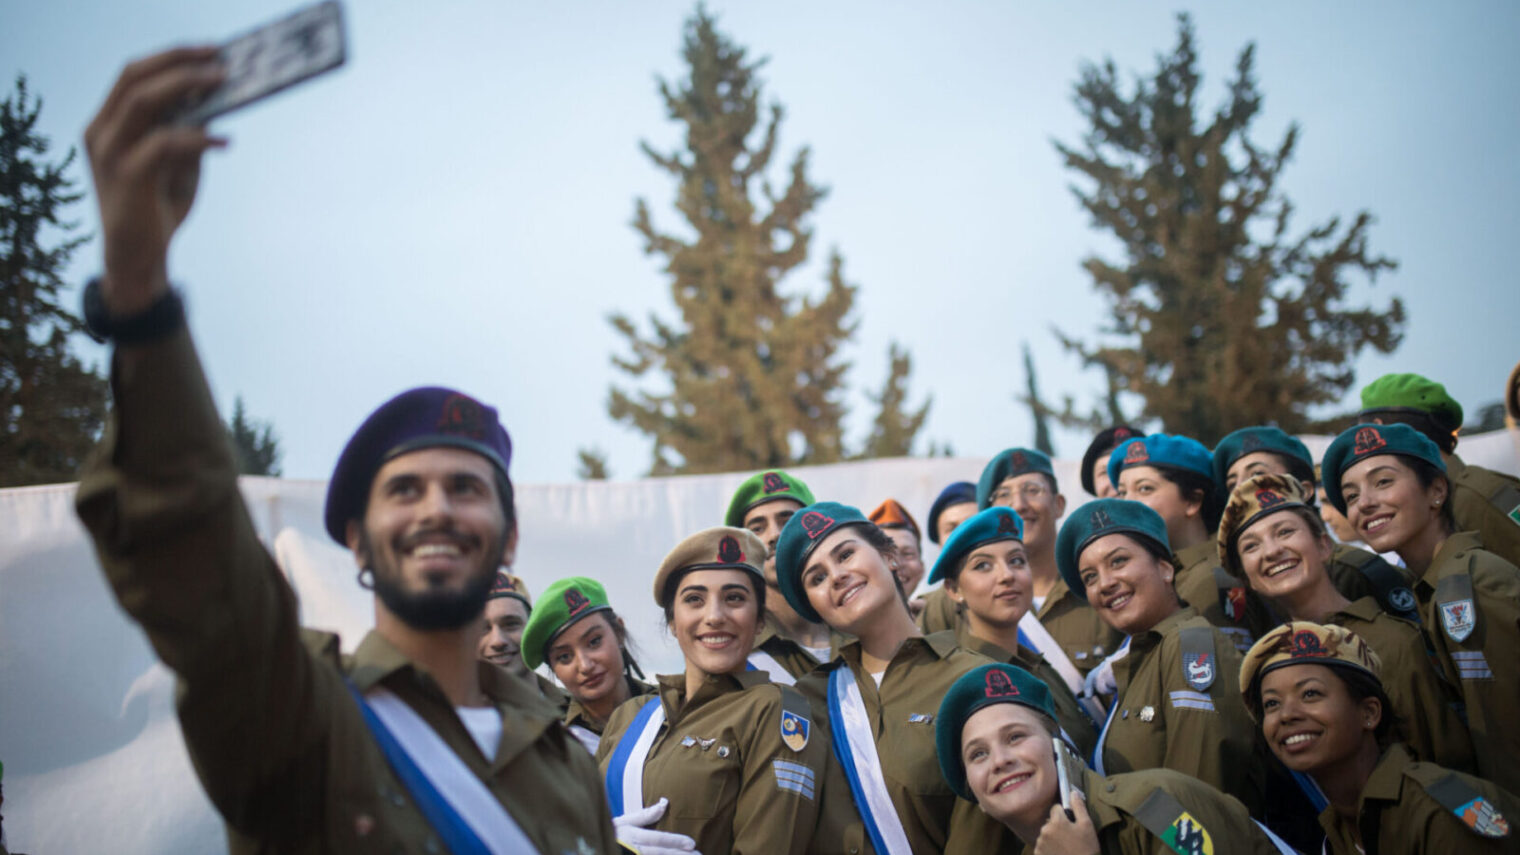 Israeli soldiers take a selfie at the 71st anniversary Independence Day ceremony at Mount Herzl, Jerusalem, on April 6, 2019. Photo by Hadas Parush/Flash90